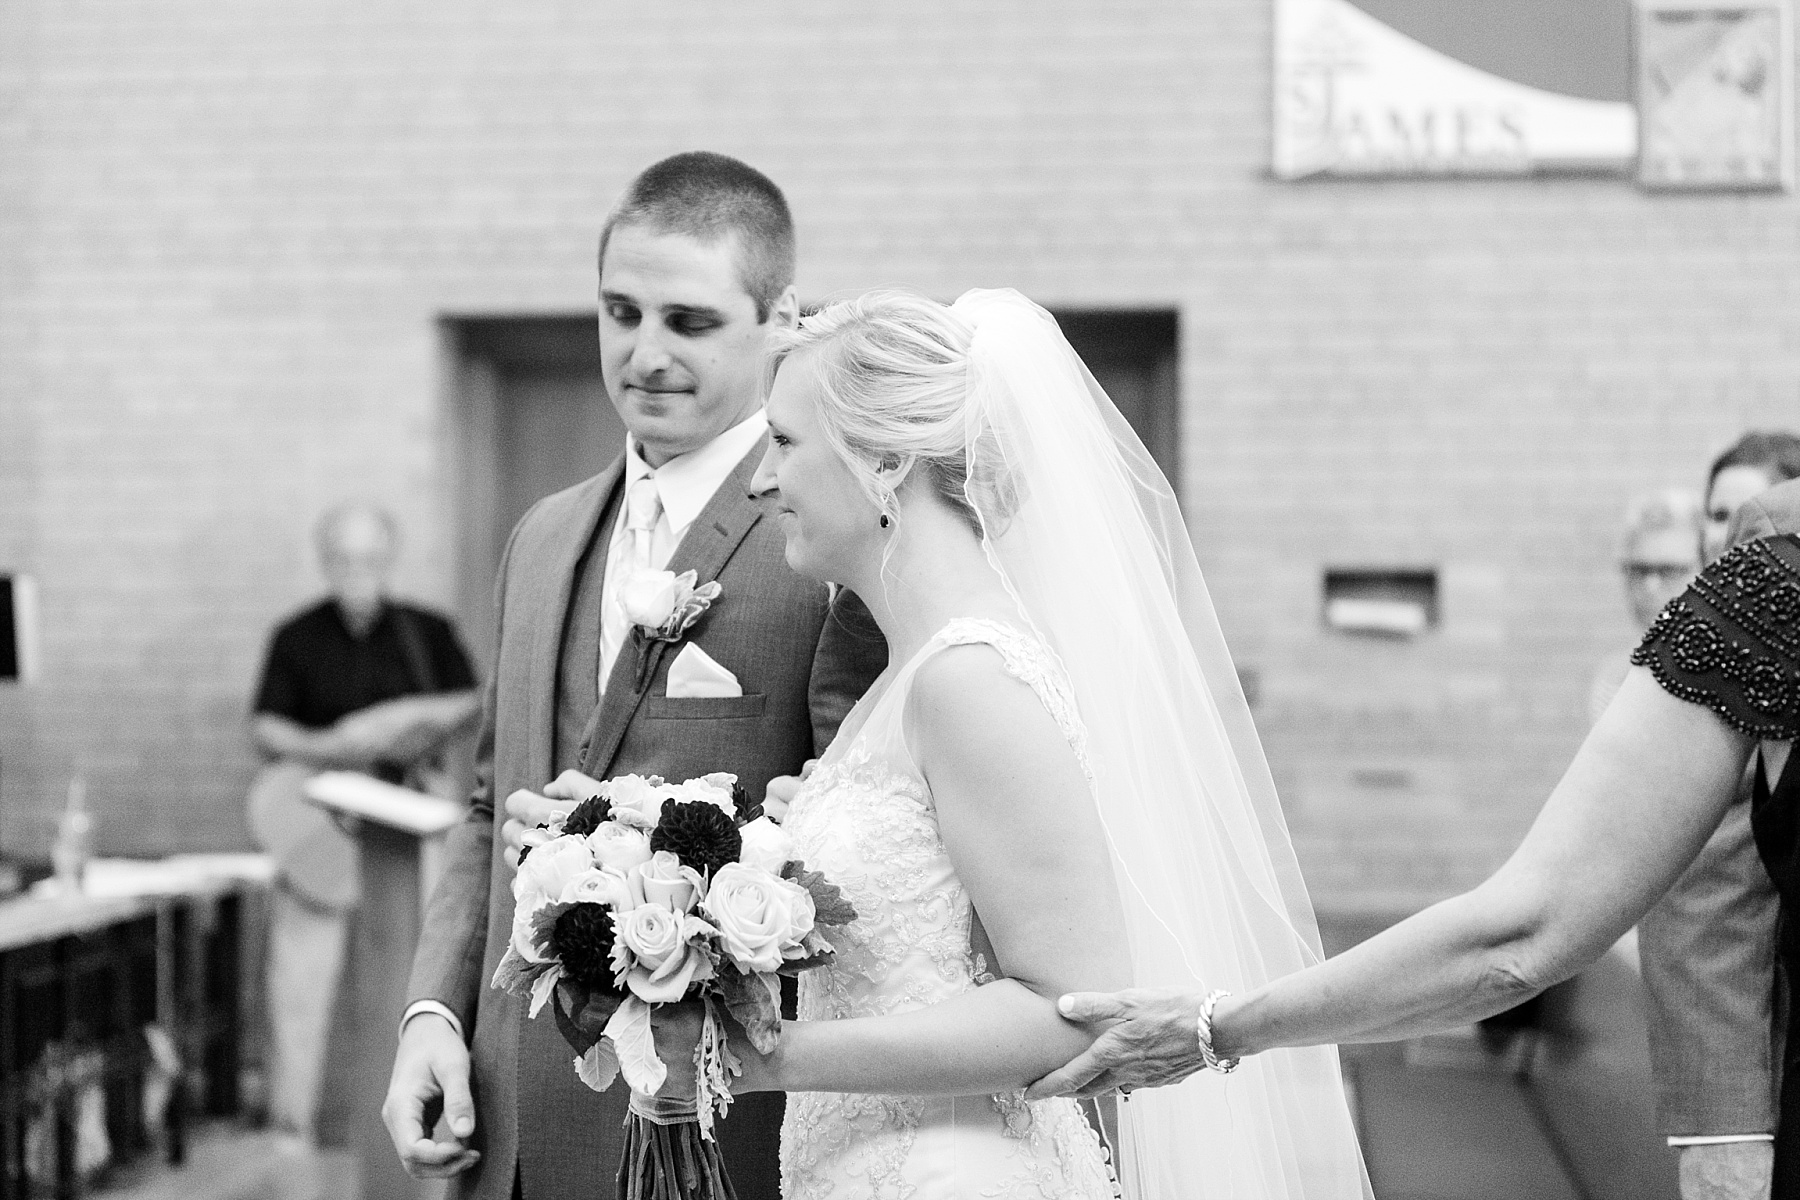 They met at a honky tonk in Nashville, he grabbed her hand on the dance floor and it sealed the deal. This past Saturday they were married in a summer Eau Claire, Wisconsin wedding.